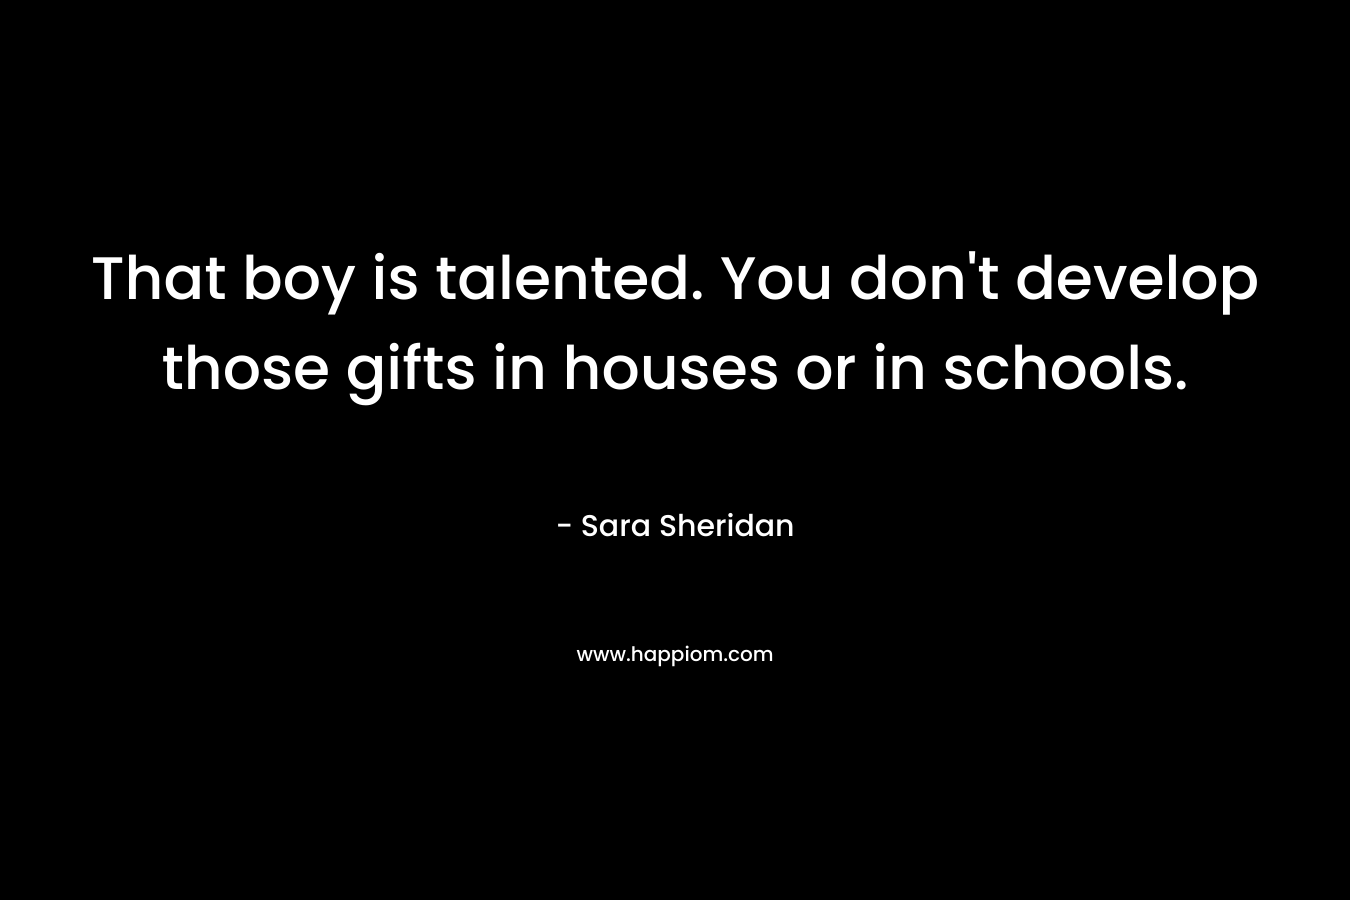 That boy is talented. You don’t develop those gifts in houses or in schools. – Sara Sheridan